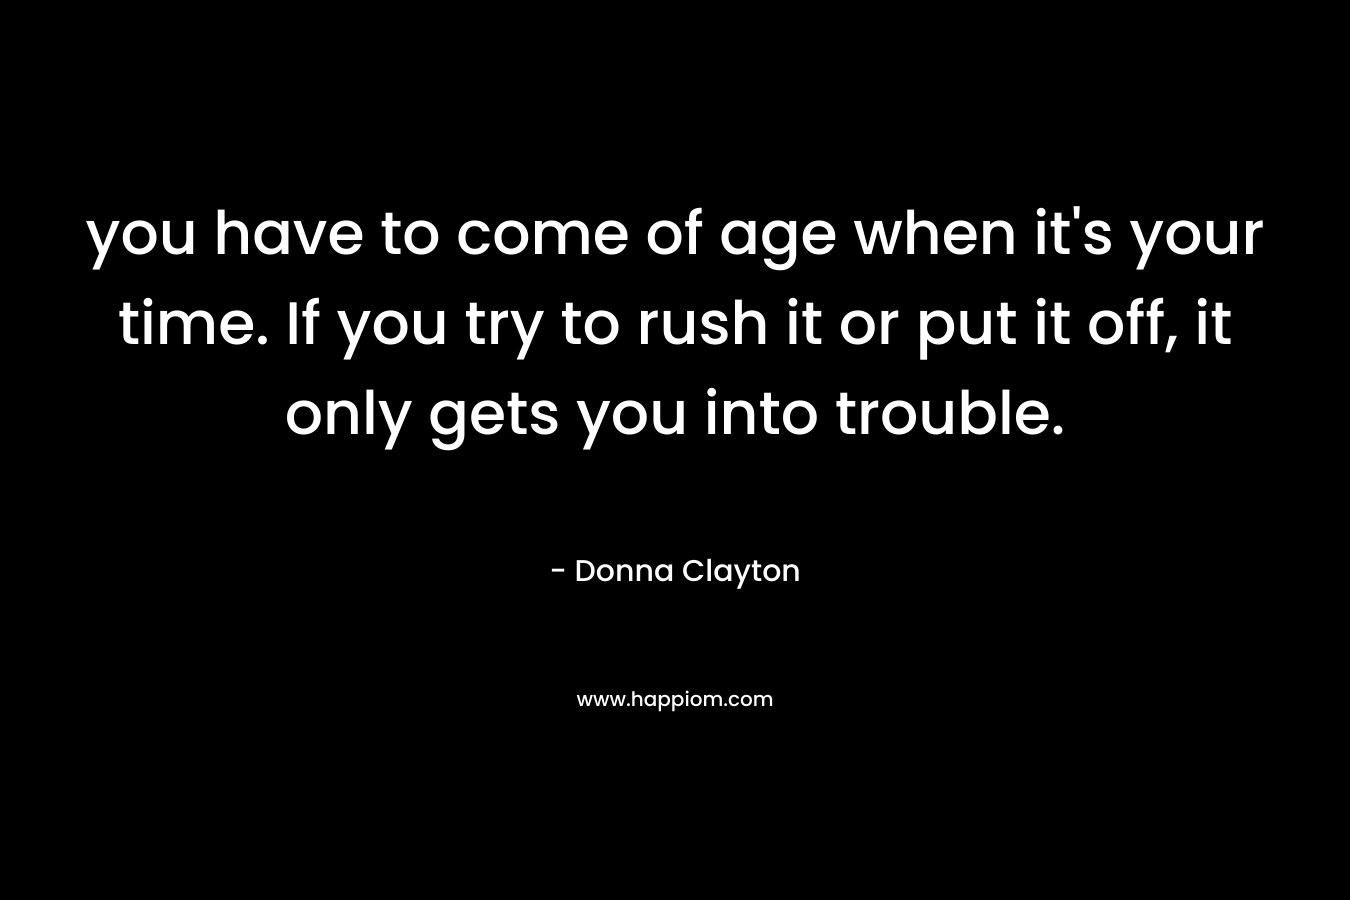 you have to come of age when it’s your time. If you try to rush it or put it off, it only gets you into trouble. – Donna Clayton